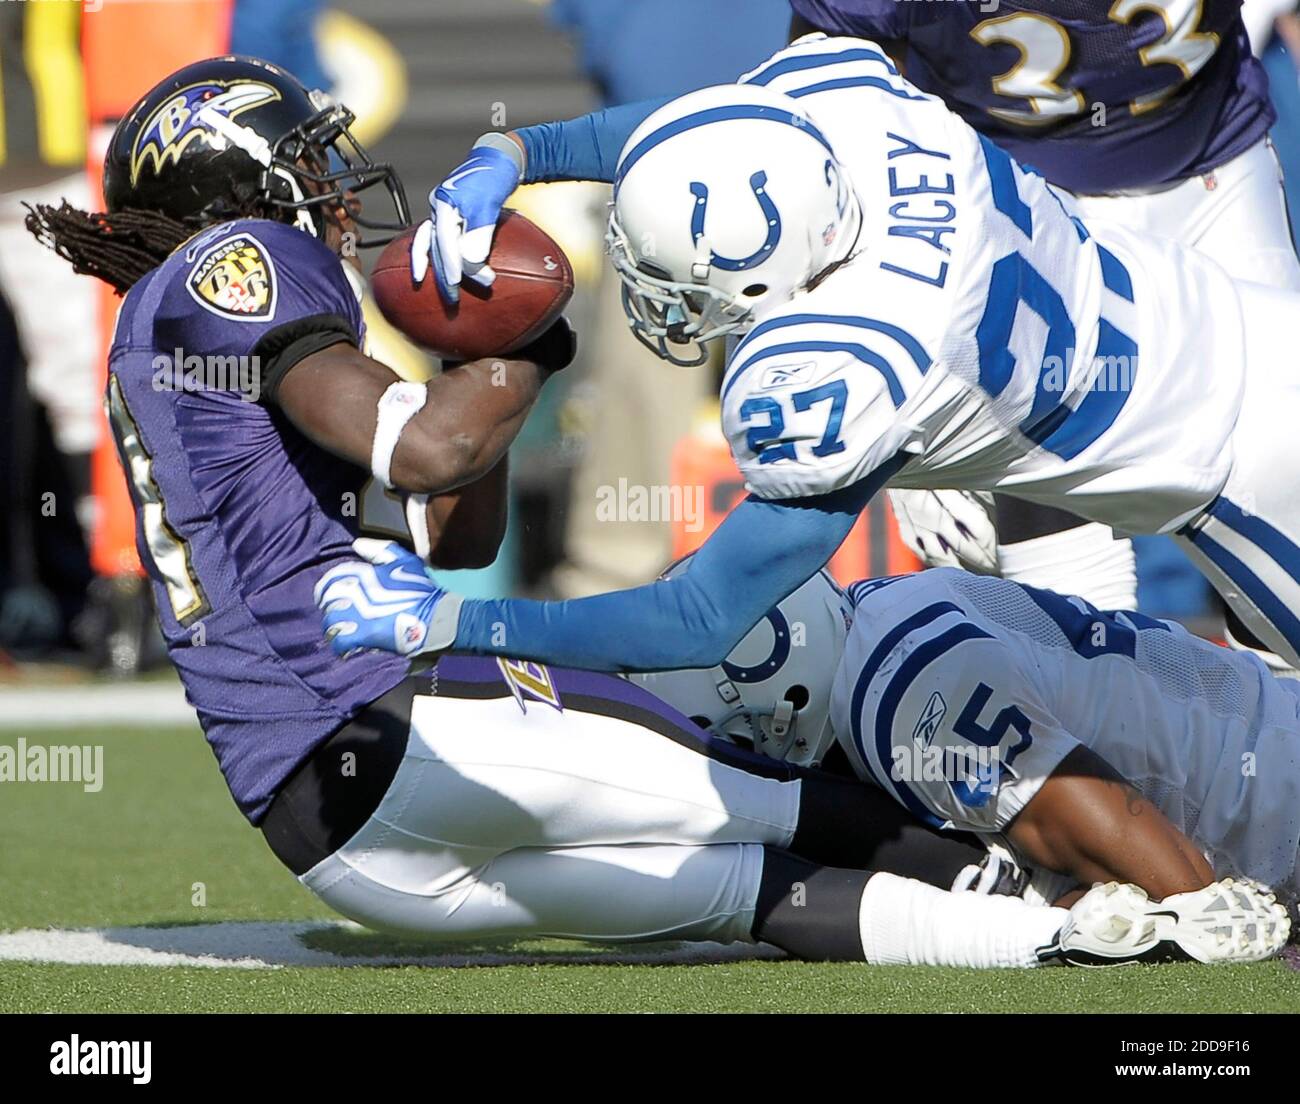 NO FILM, NO VIDEO, NO TV, NO DOCUMENTARY - Indianapolis Colts cornerback Jacob Lacey (27) strips the ball from Baltimore Ravens cornerback Lardarius Webb (21) as he falls in the first quarter of play in Baltimore, MD, USA on November 22, 2009. The Colts defeated the Ravens 17-15. Photo by Karl Merton Ferron/Baltimore Sun/MCT/Cameleon/ABACAPRESS/COM Stock Photo